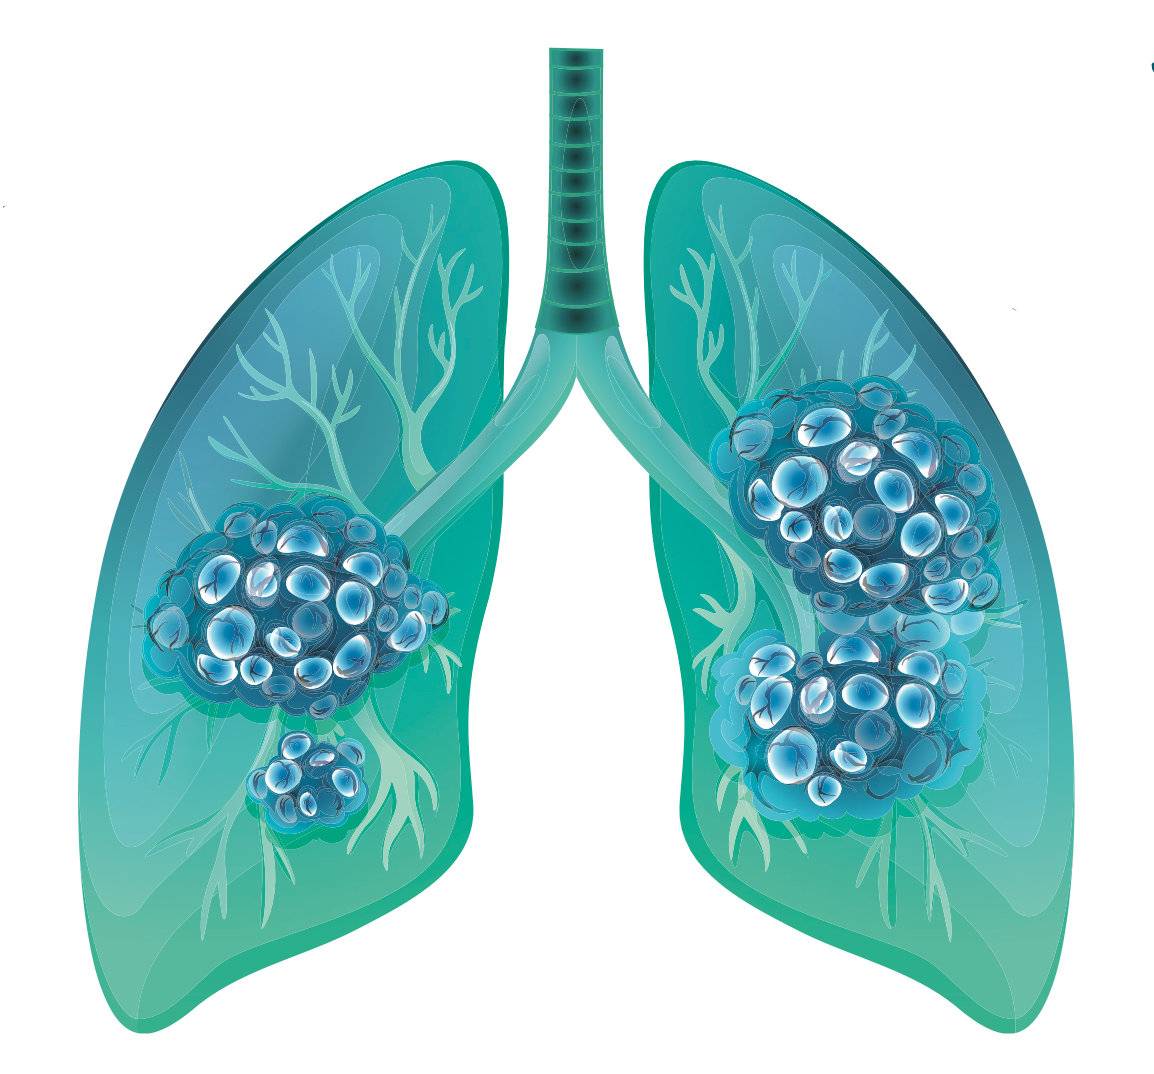 Lung Cancer Study Brings Pharmacists to the Forefront of Patient Care